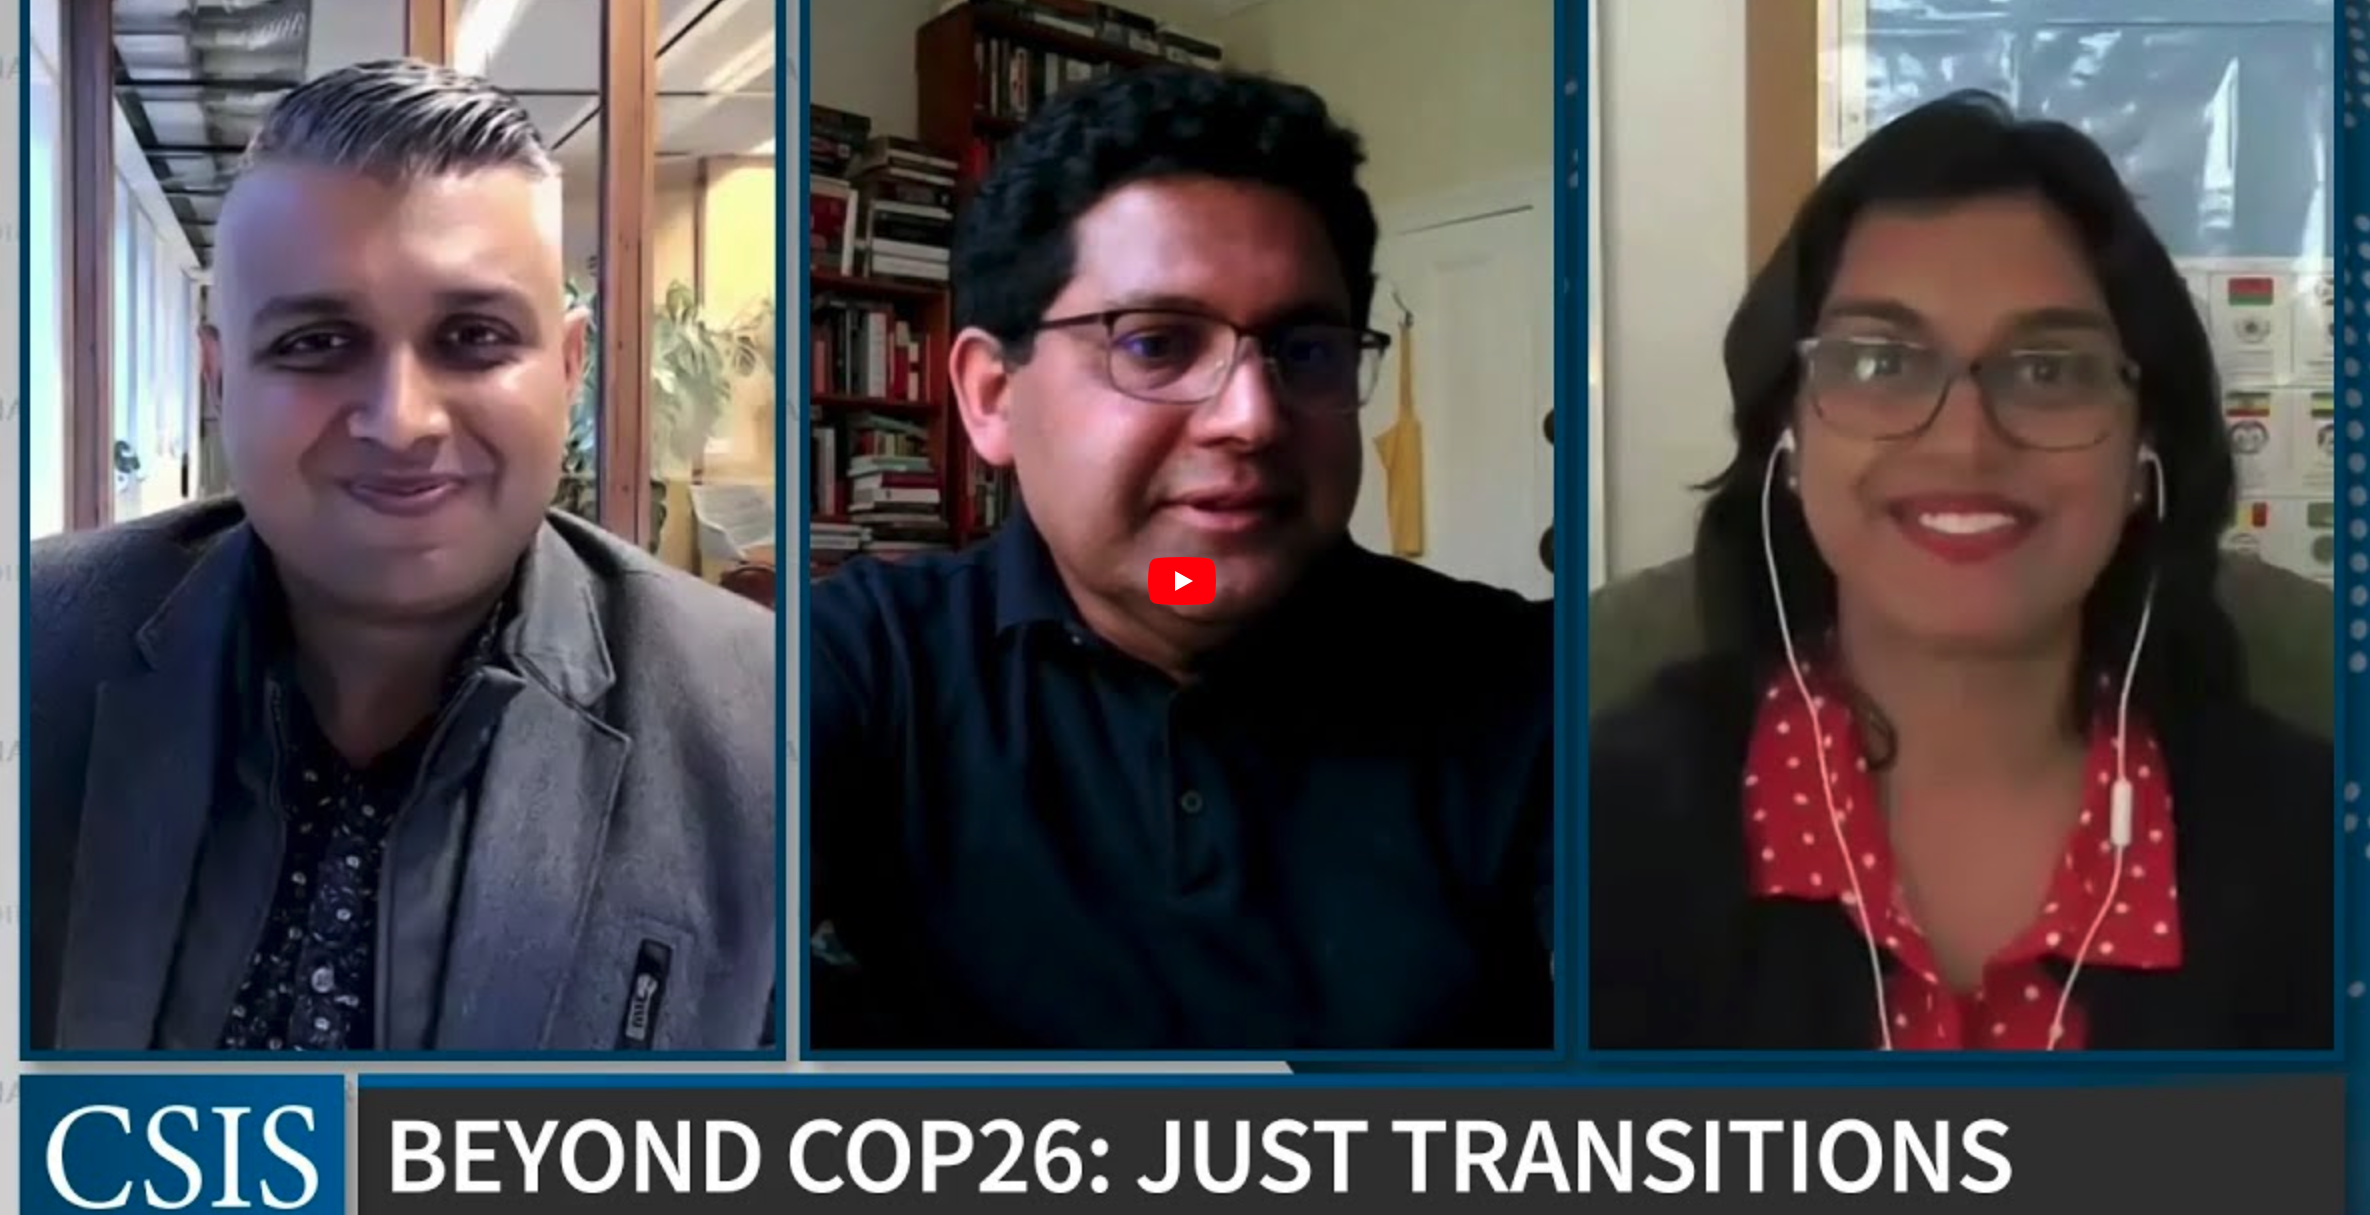 Beyond COP26: Just Transitions